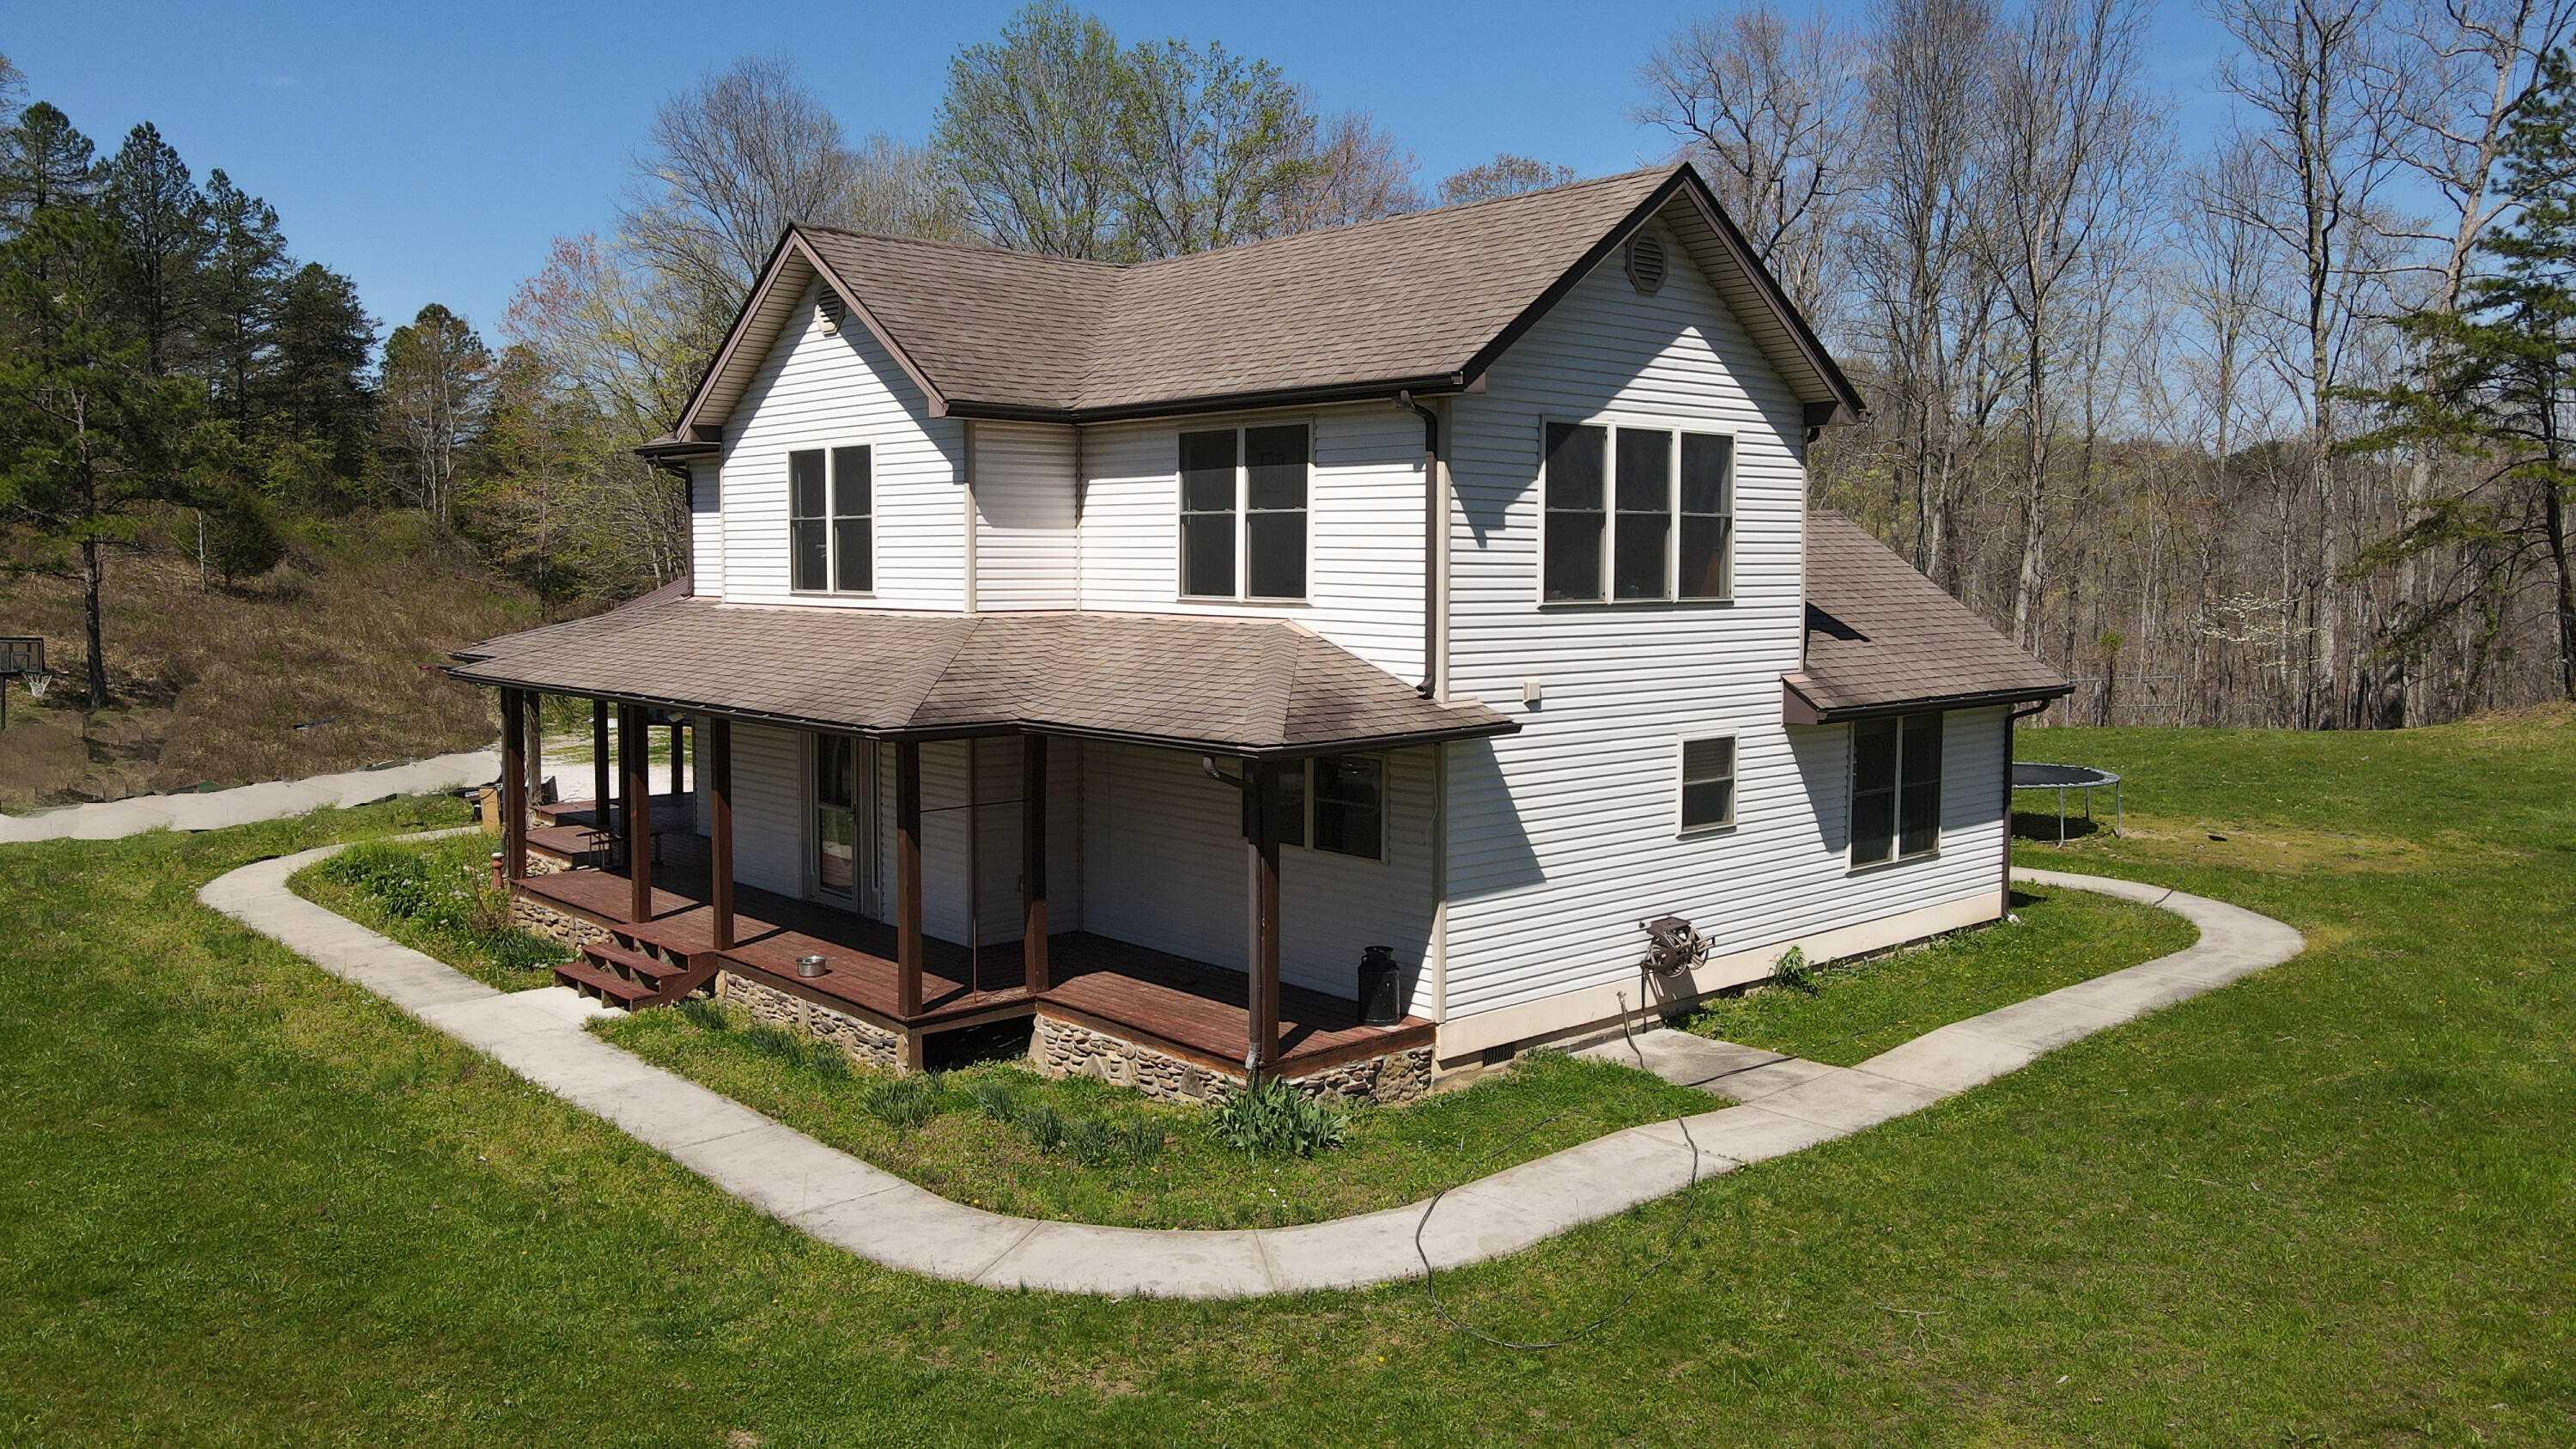 7401 Hwy 89 N, 23006527, McKee, Single Family Residence,  for sale, KY Real Estate Professionals LLC